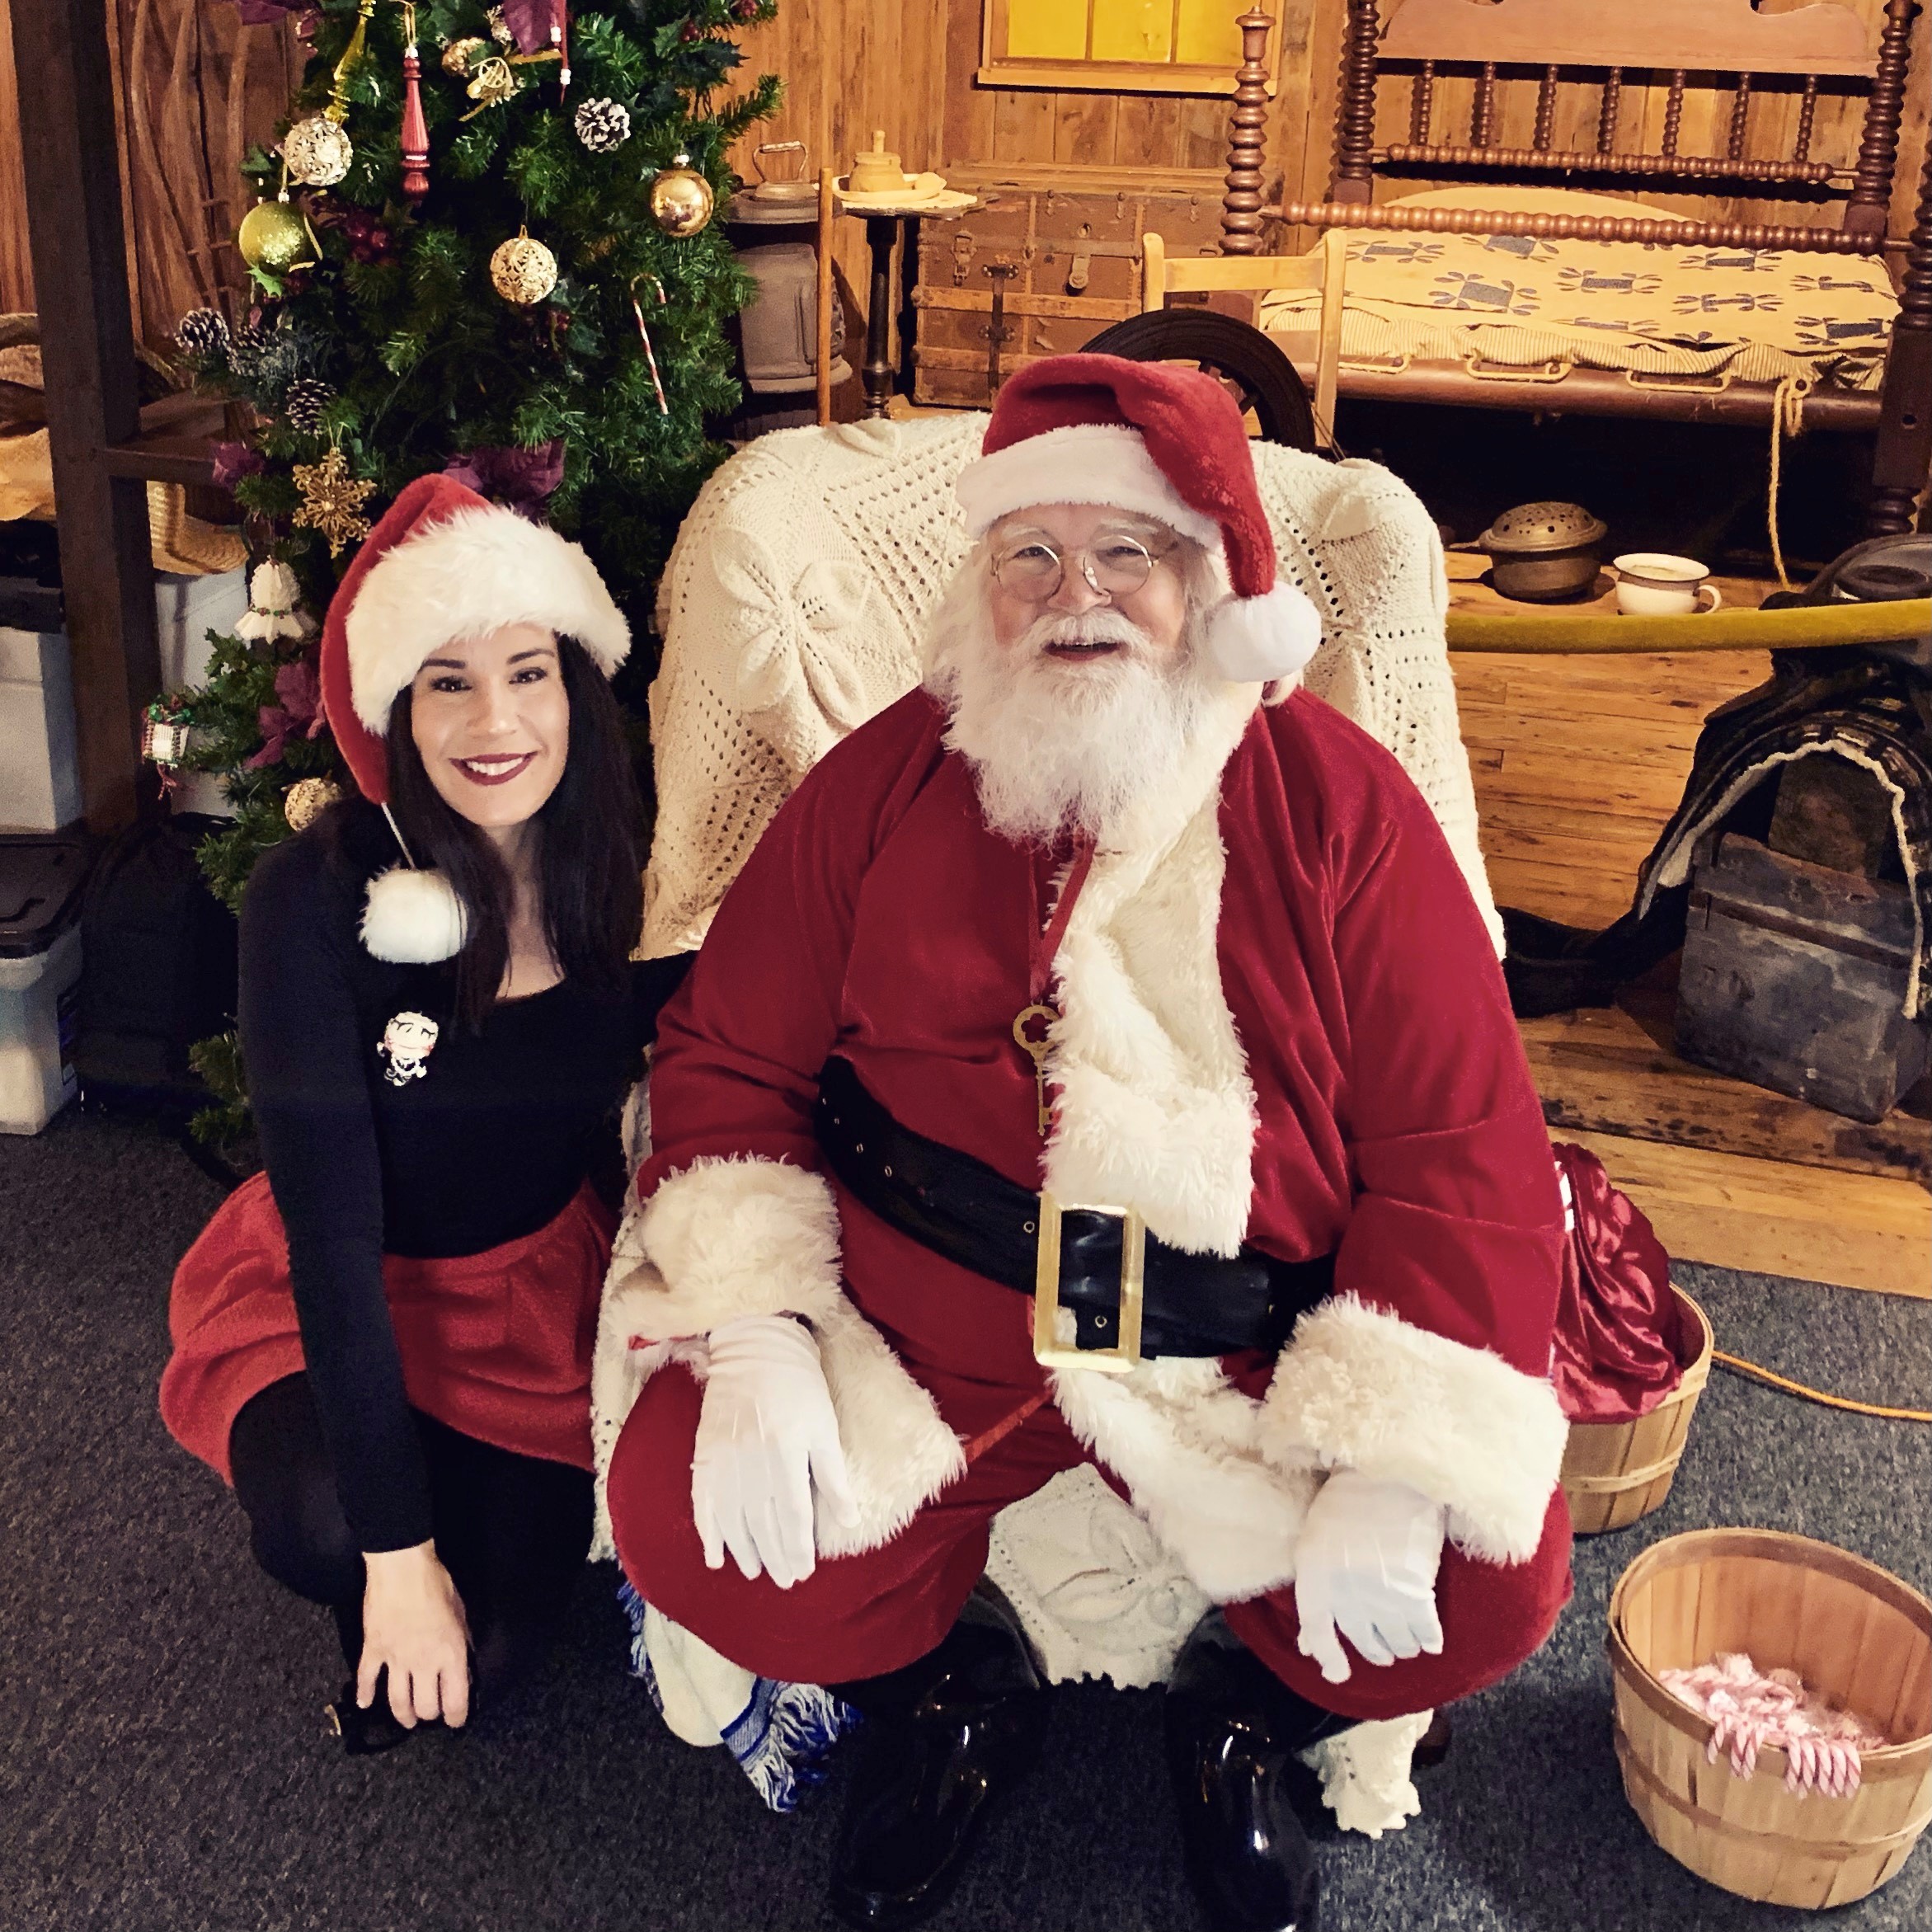 Girl poses with Santa at the museum of the gulf coast’s Christmas family fun day in Port Arthur Texas